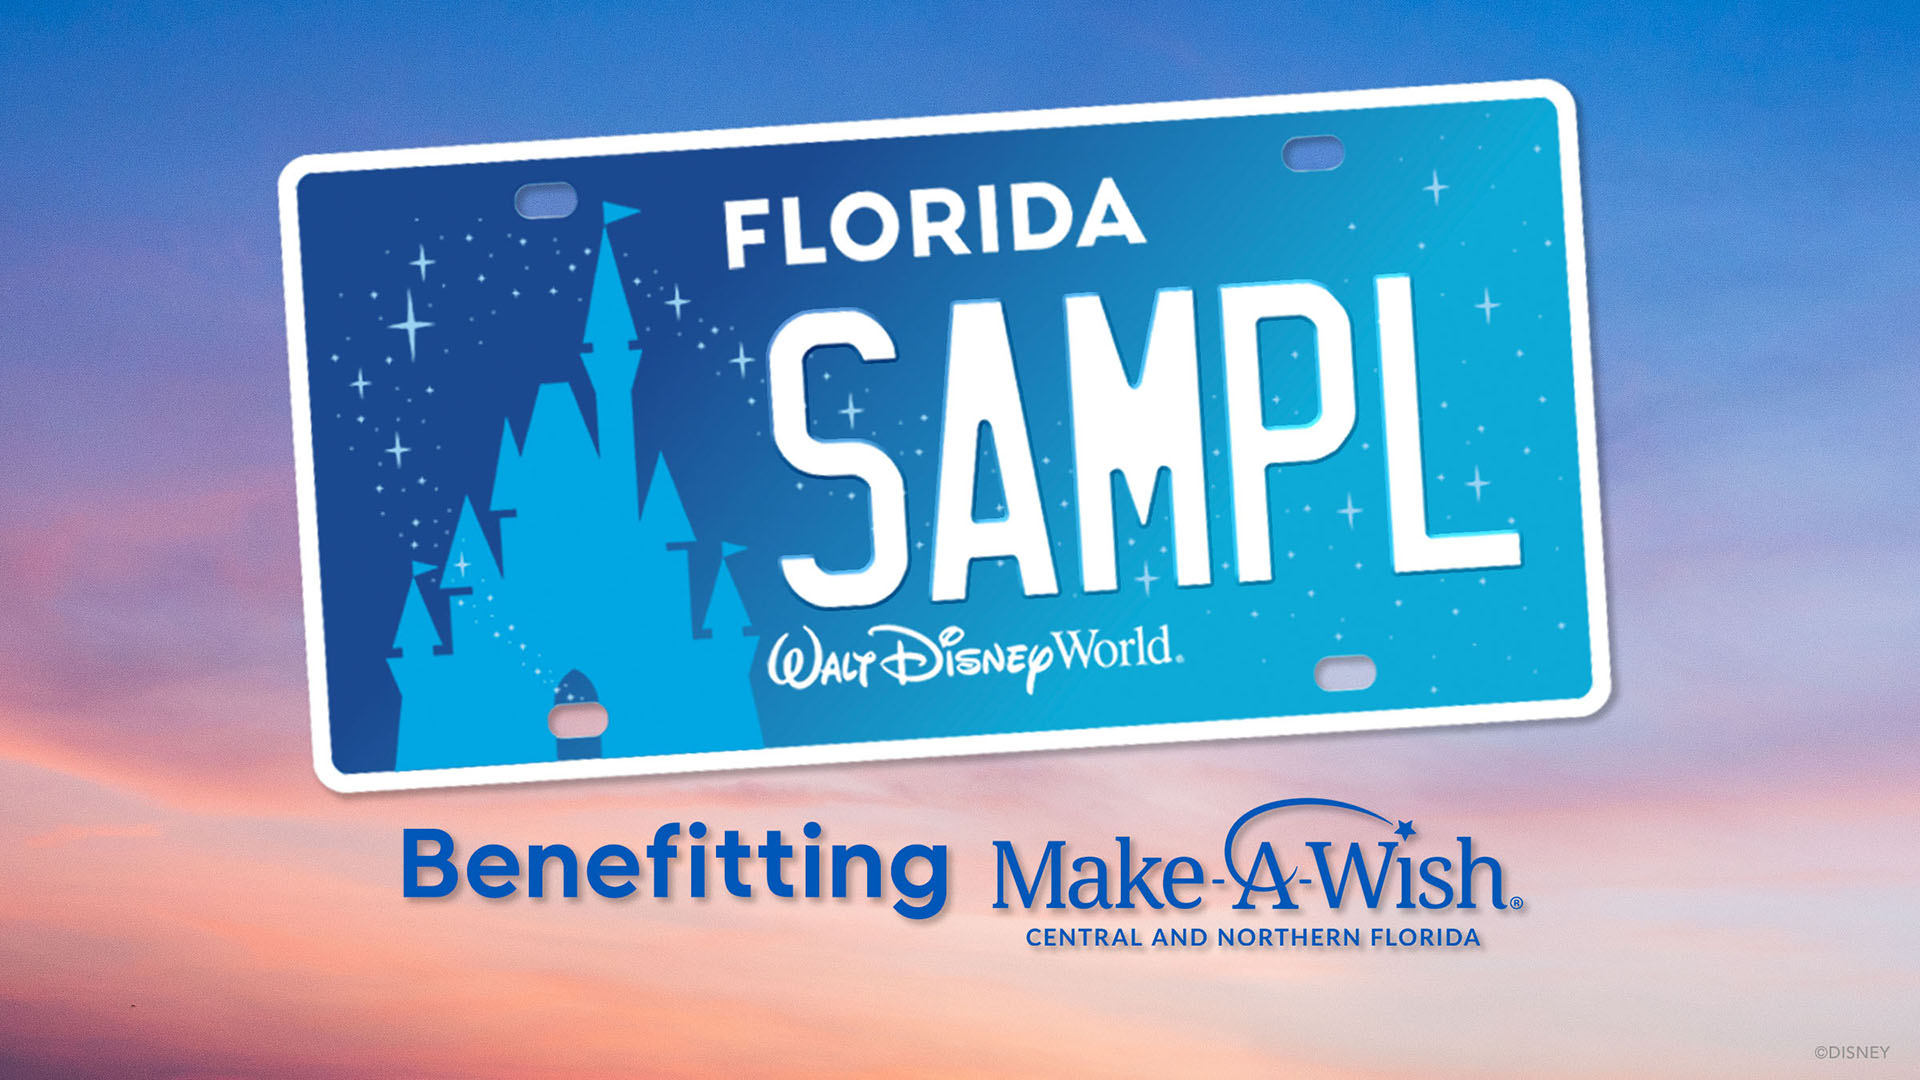 Walt Disney World Specialty License Plate floating on a cloud background